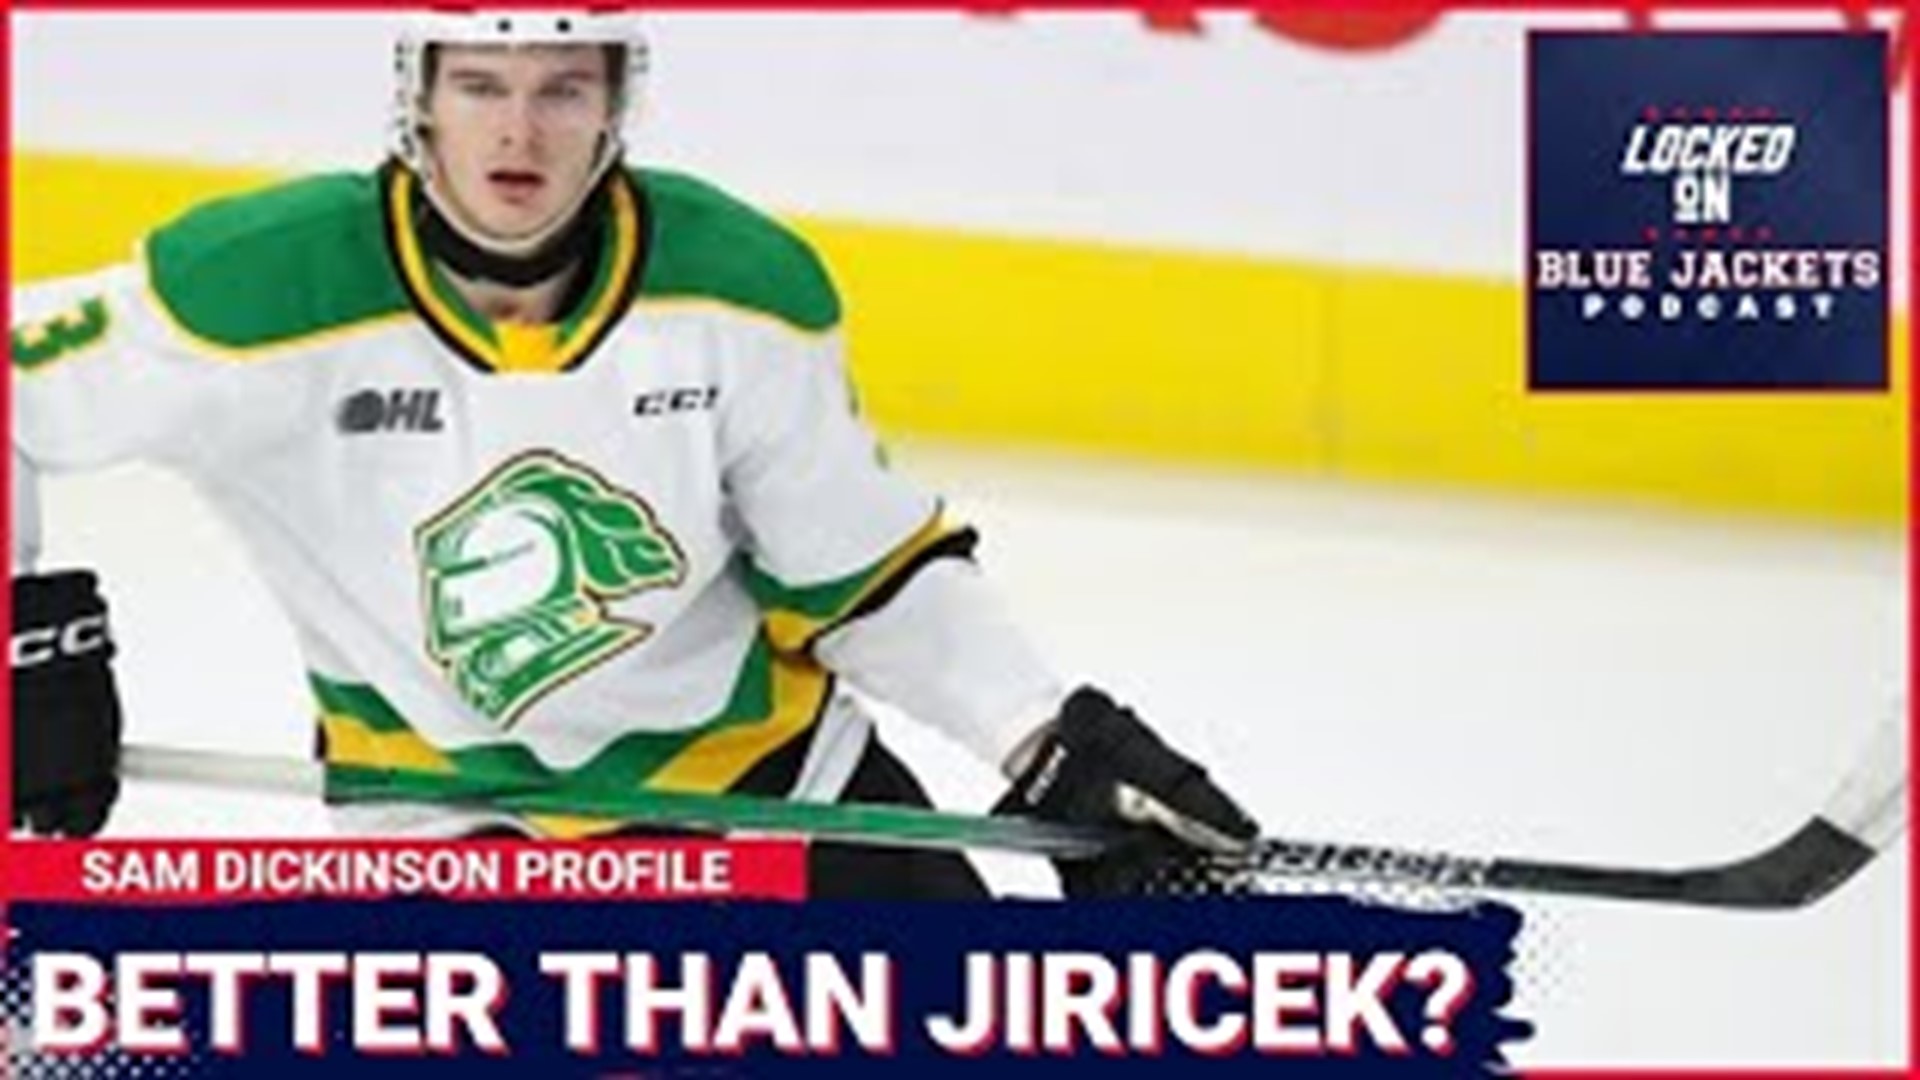 According to Brock Otten of McKeen's Hockey, Sam Dickinson has the potential to be better than any other defenceman in the CBJ prospect pool.